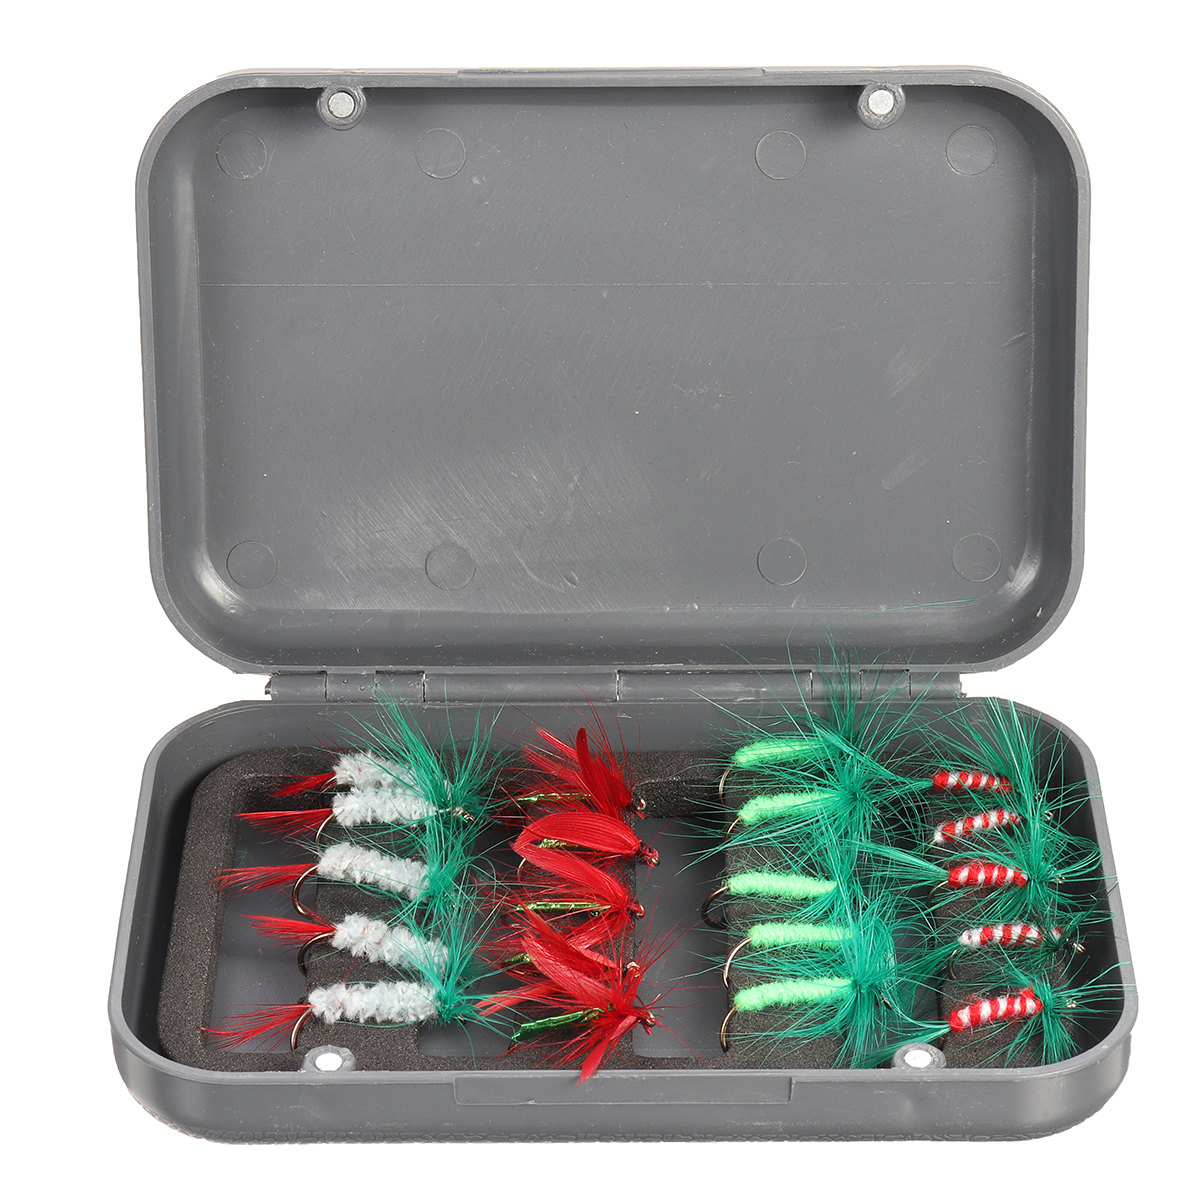 ZANLURE-20-Pcs-Fishing-Lures-Portable-Metal-Fly-Hook-Used-for-Trout-Freshwater-Saltwater-Outdoor-Fis-1837798-8